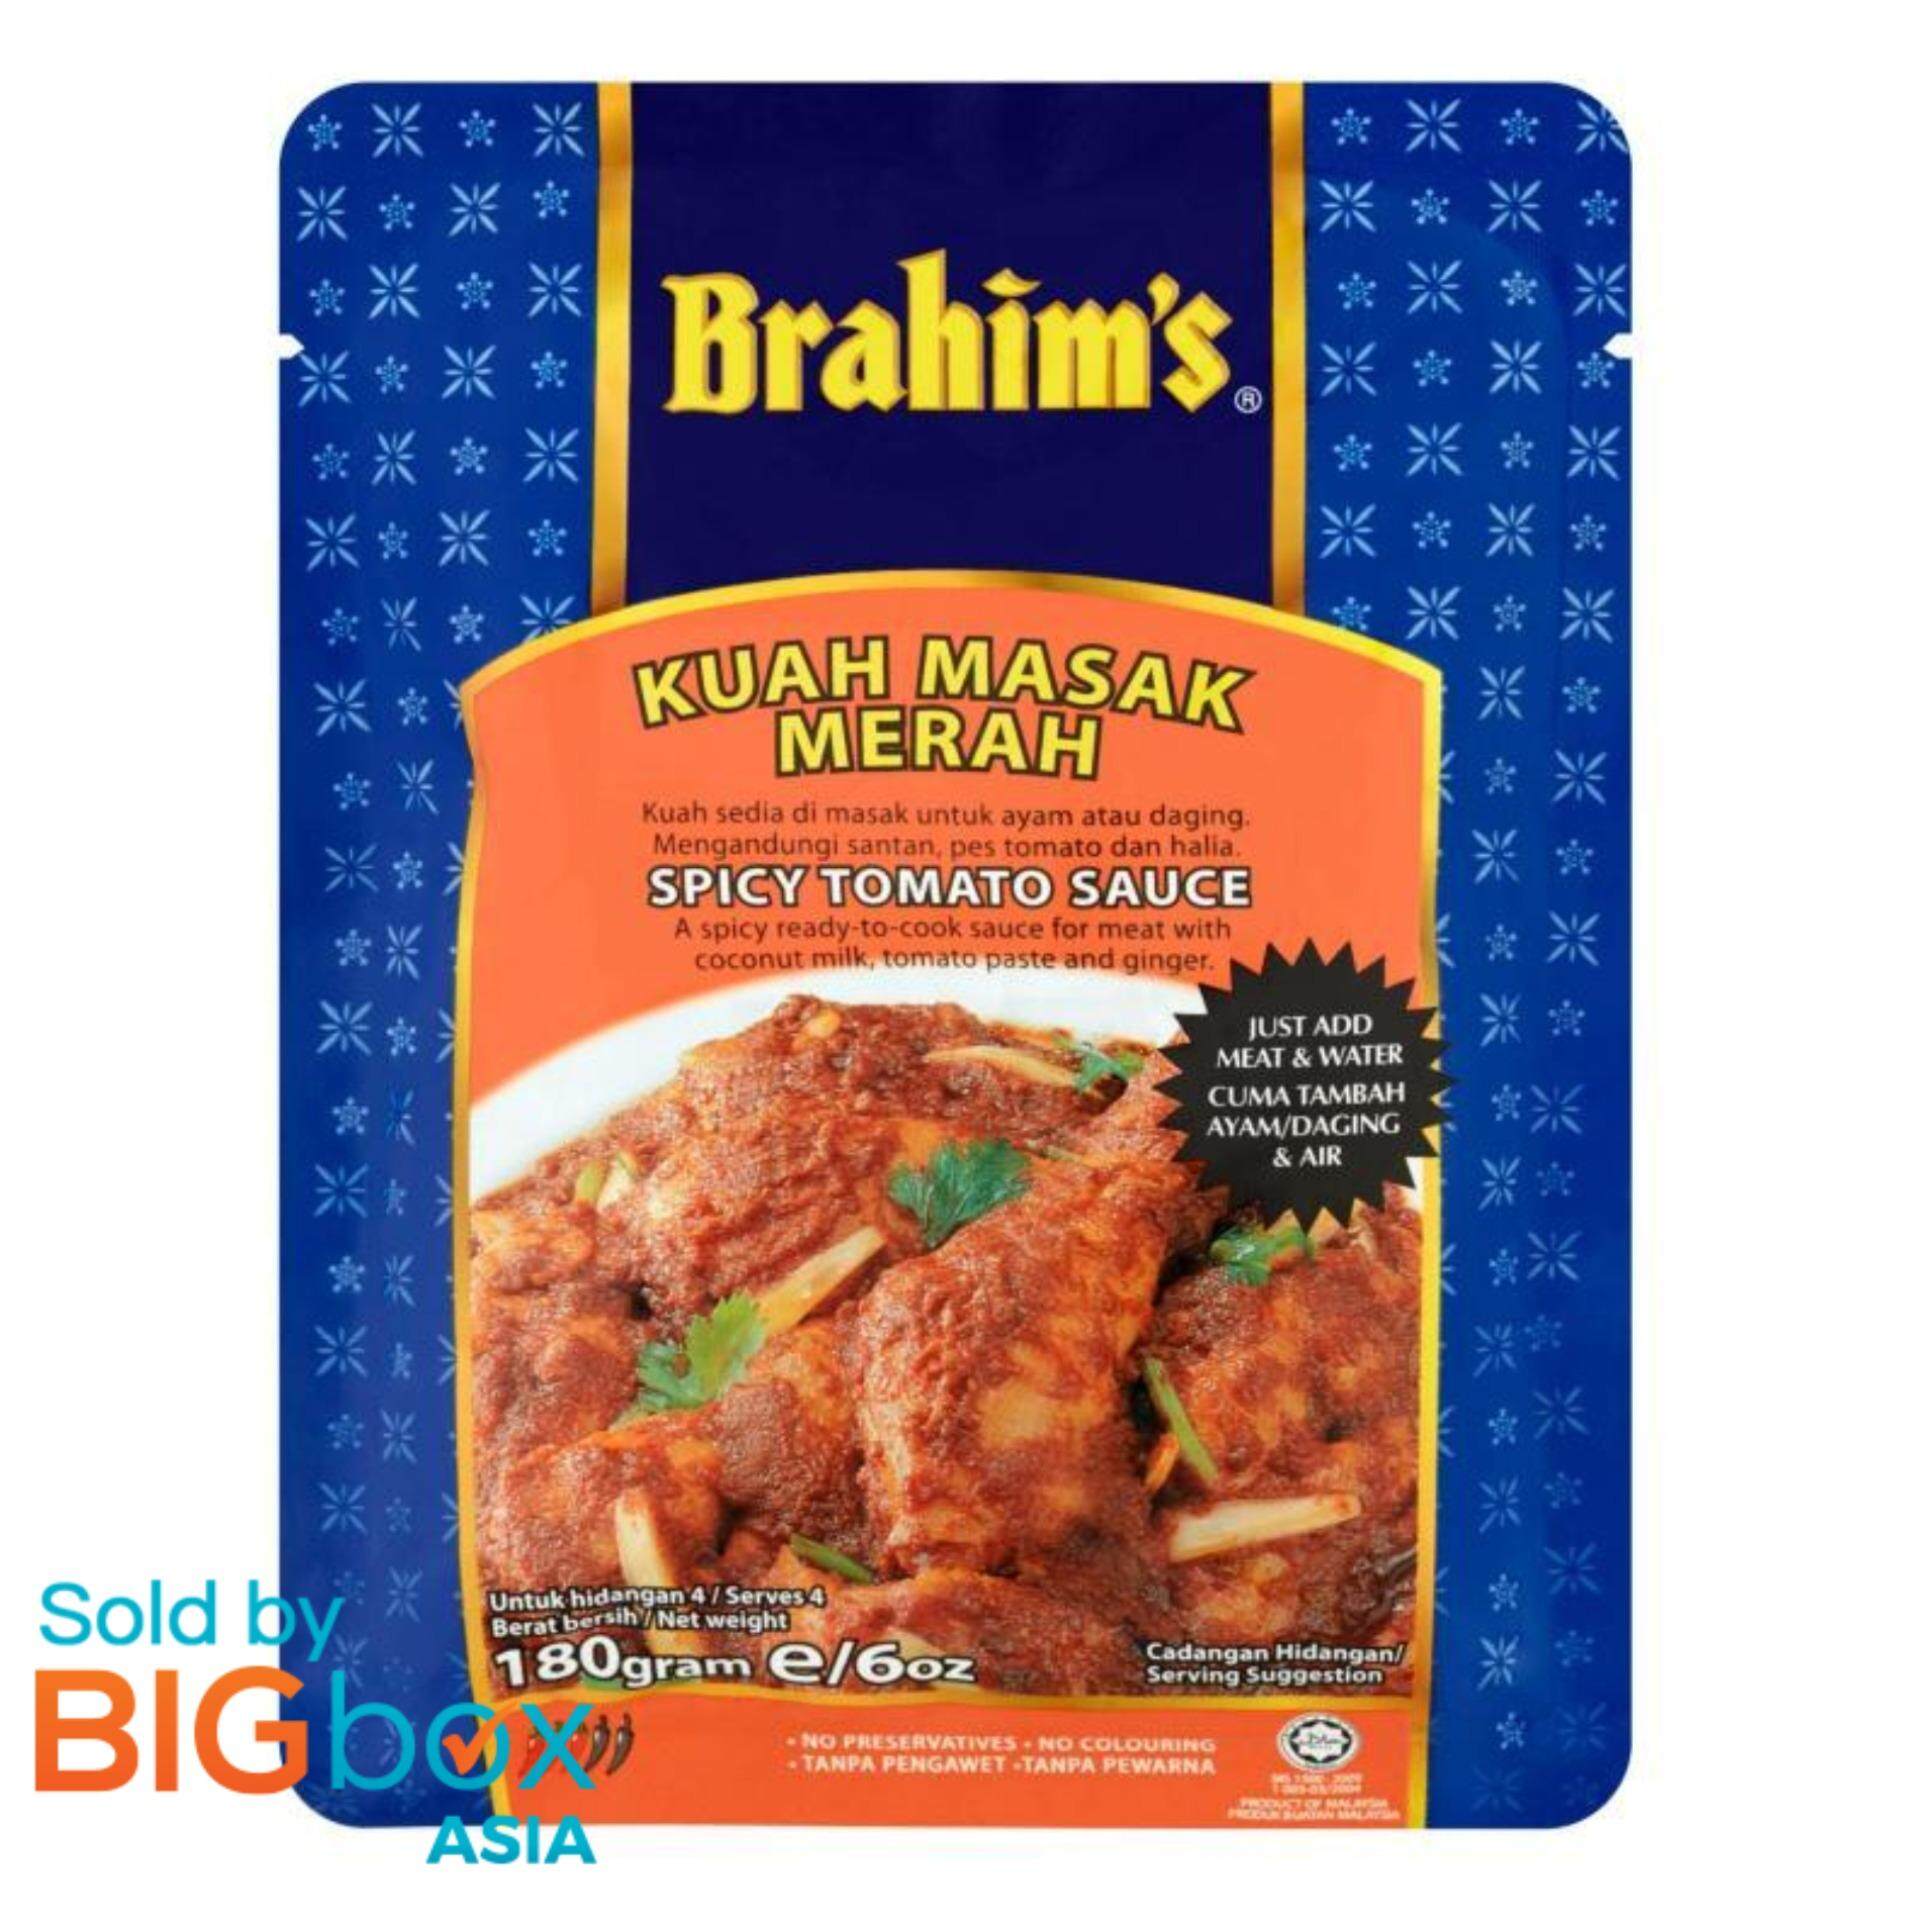 Brahim's Ready To Use Sauces 180g - Spicy Tomato